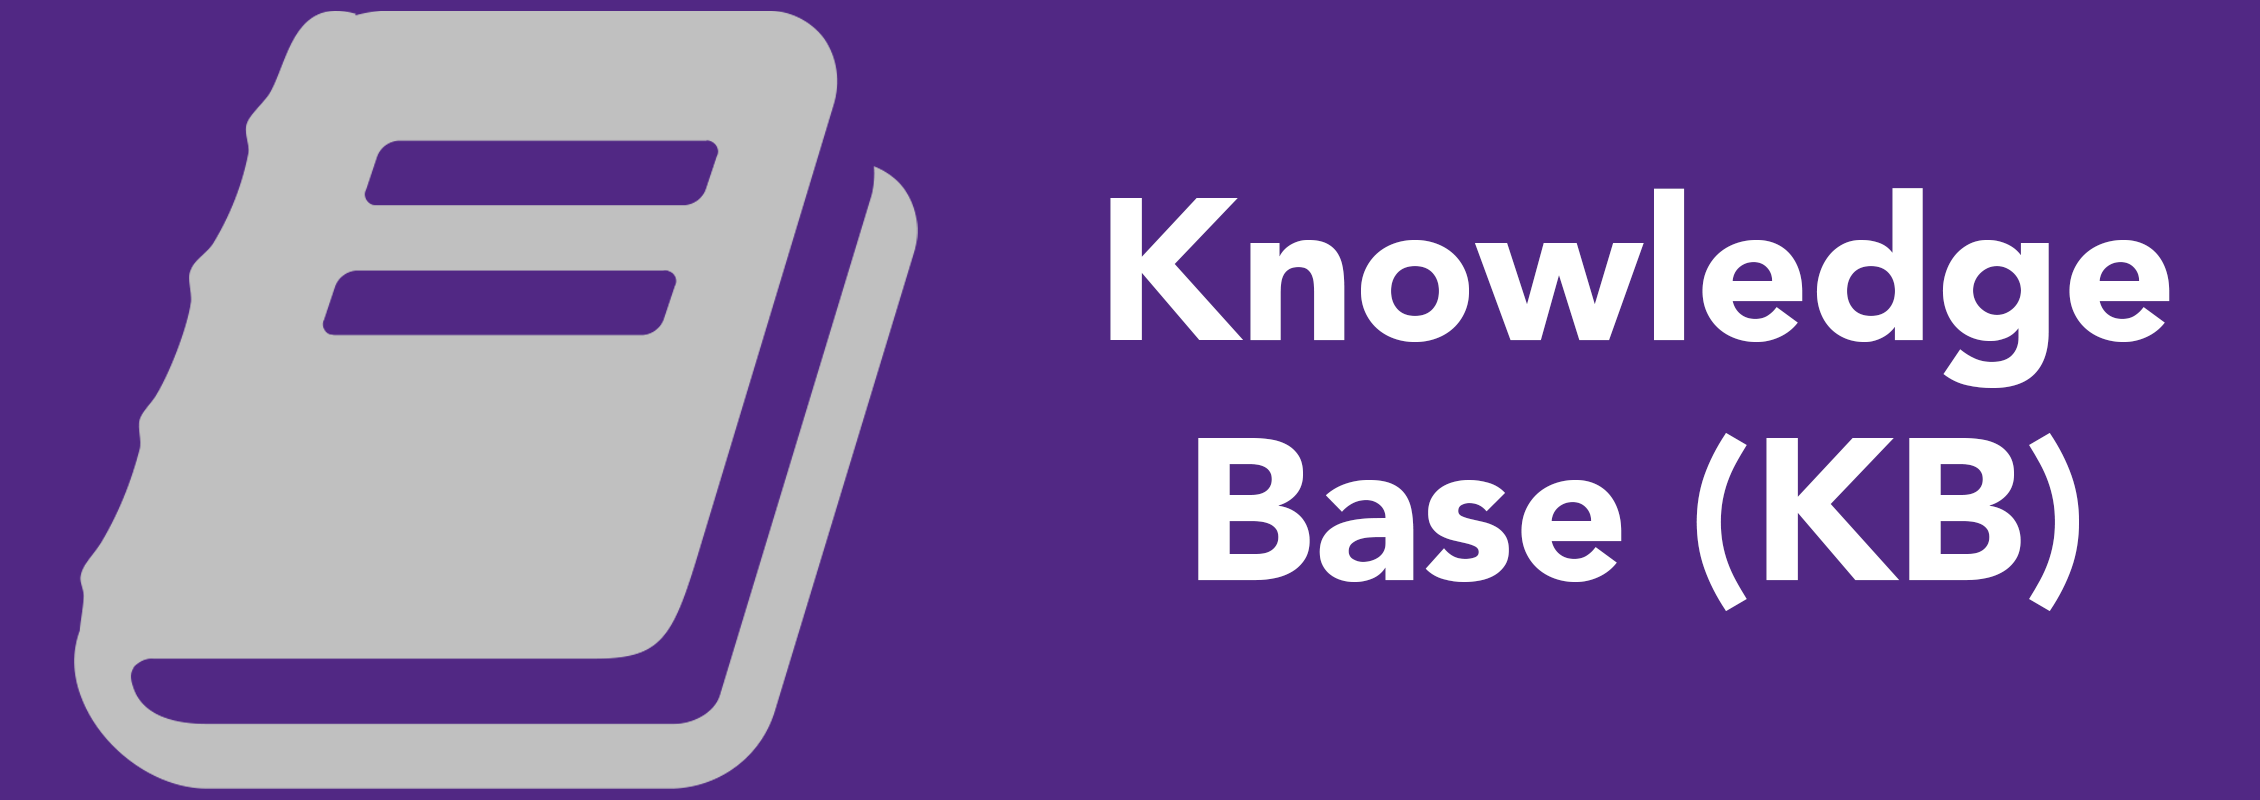 Icon depicting knowledge base resources